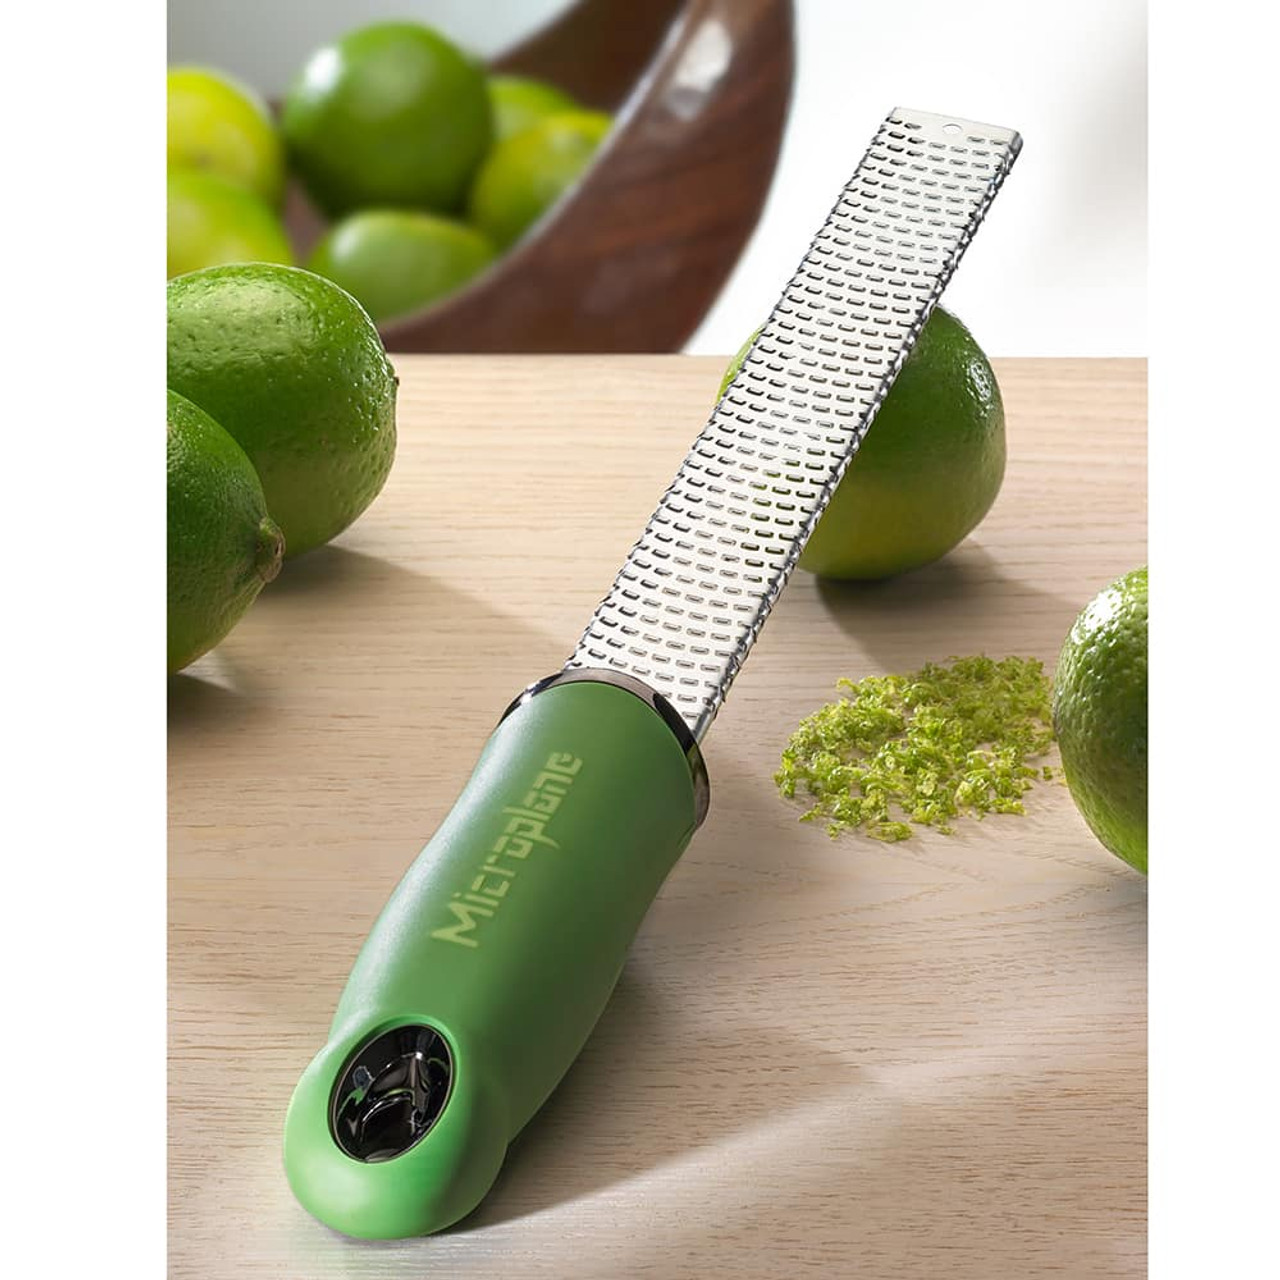 https://cdn11.bigcommerce.com/s-hccytny0od/images/stencil/1280x1280/products/1211/2857/microplane-premium-classic-series-zester-grater-2__42842.1595340347.jpg?c=2?imbypass=on